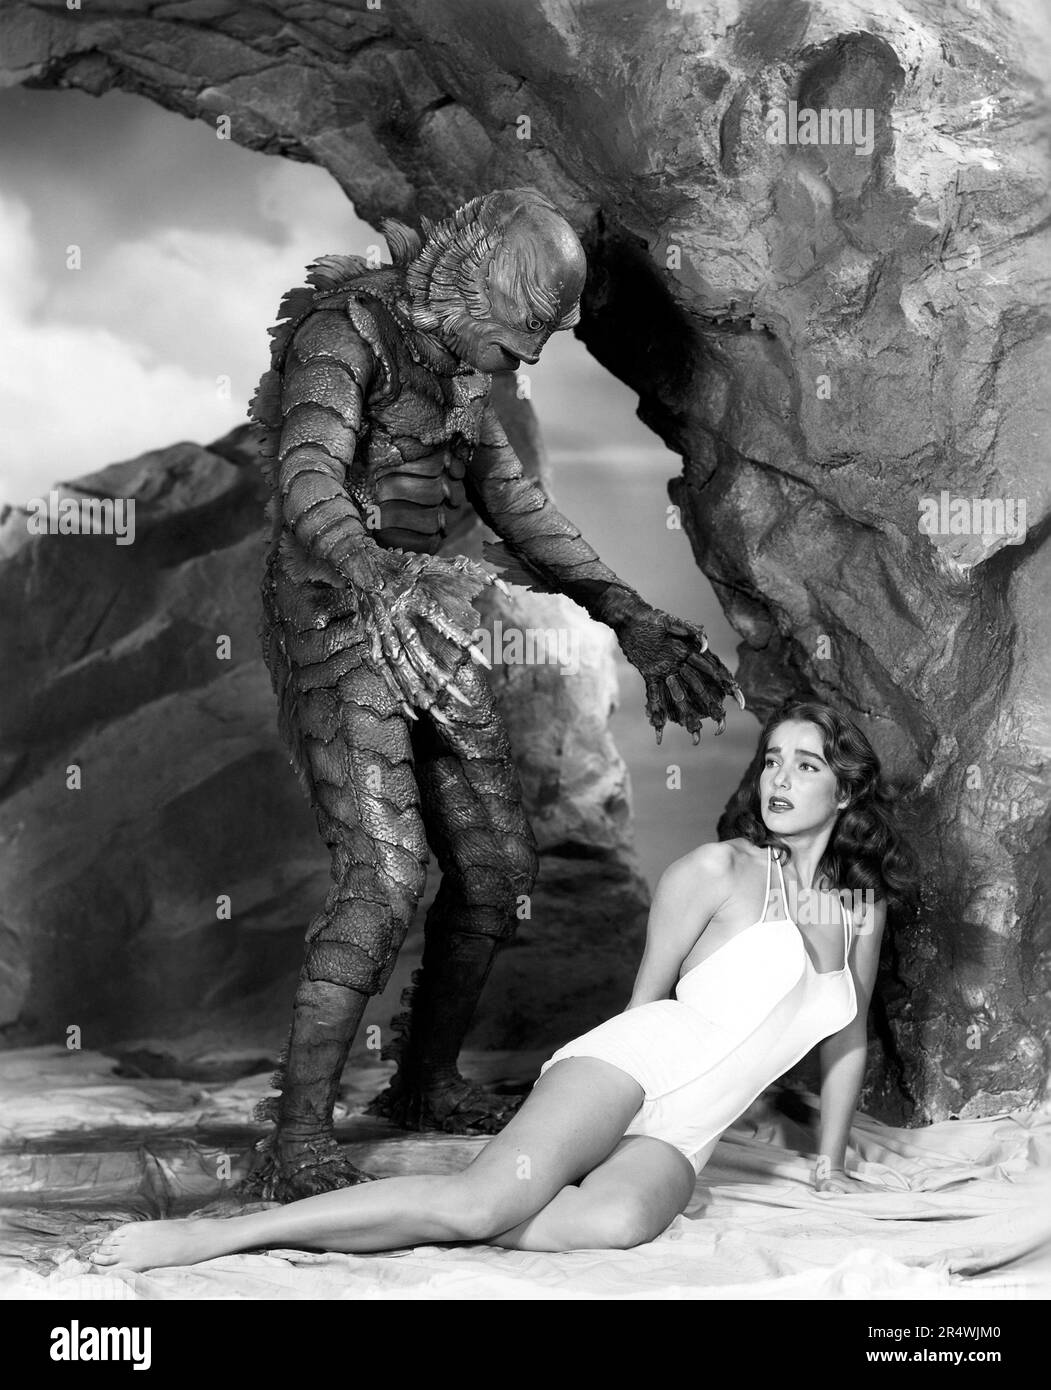 Creature from the Black Lagoon is a 1954 monster horror 3-D film in black-and-white, directed by Jack Arnold and starring Richard Carlson, Julia Adams, Richard Denning, Antonio Moreno and Whit Bissell. The Creature was played by Ben Chapman on land and by Ricou Browning underwater. Stock Photo